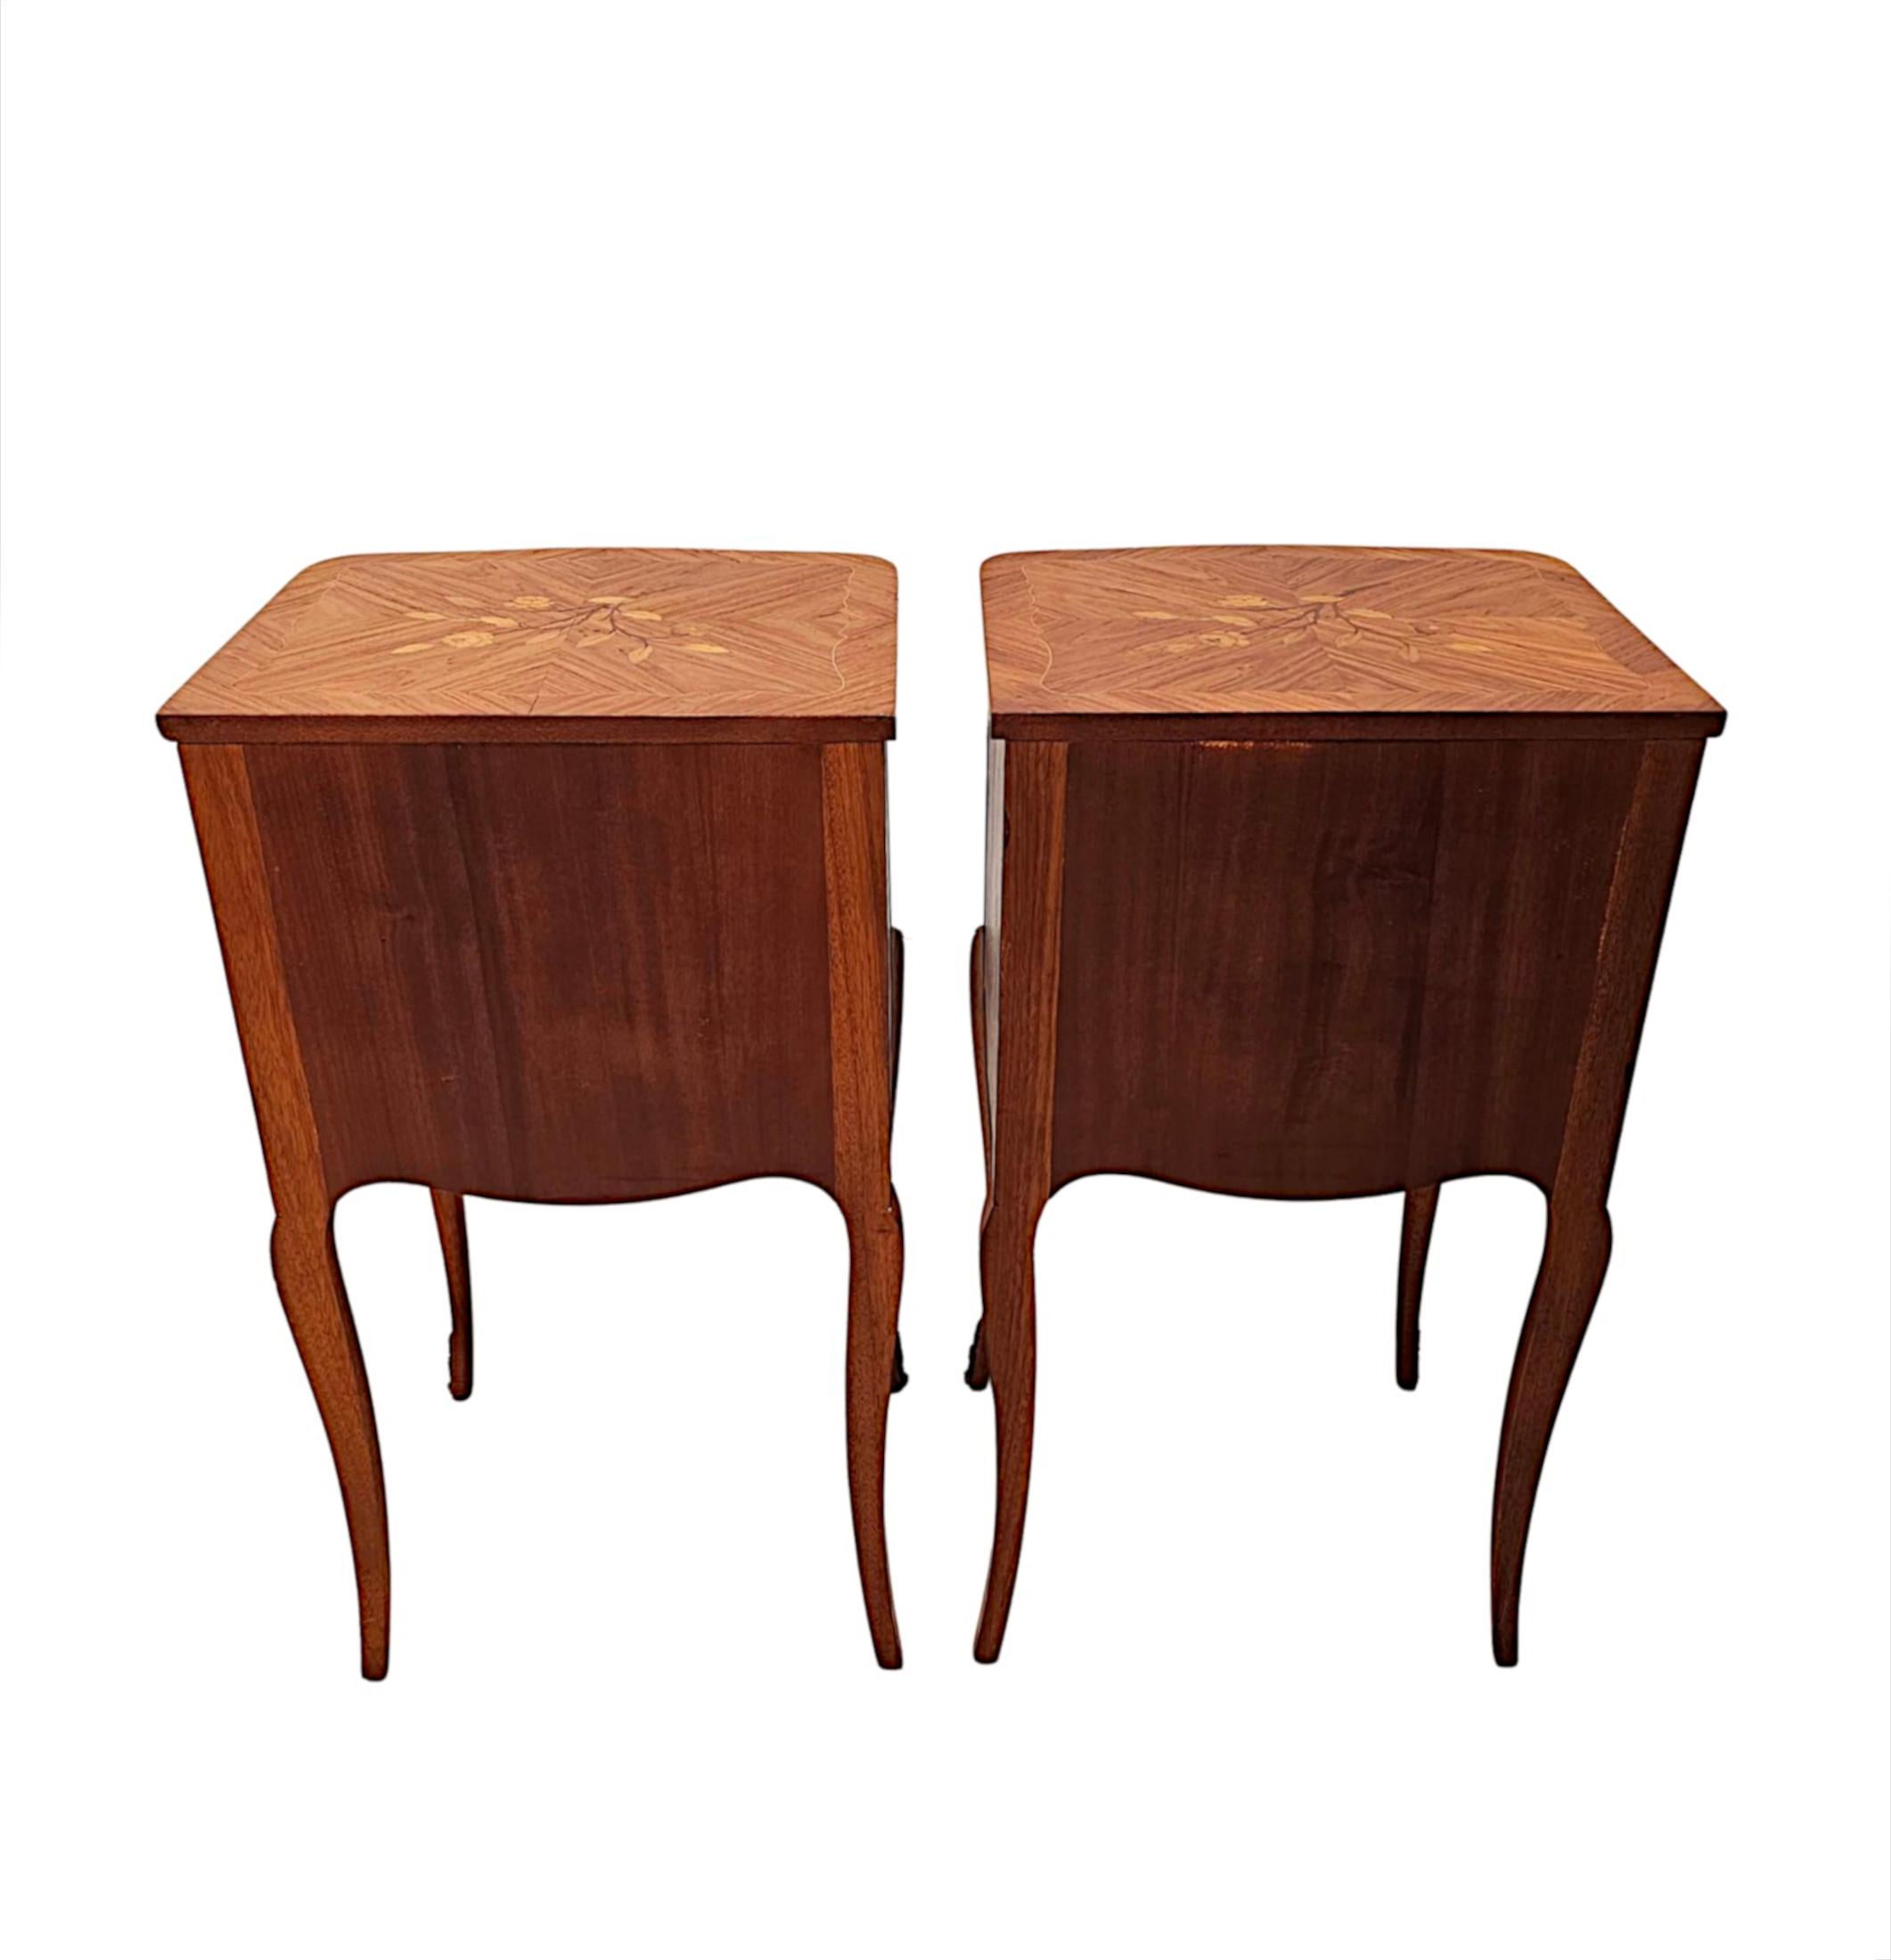 A Fabulous Pair of Early 20th Century Marquetry Inlaid Bedside Tables or Chests For Sale 1